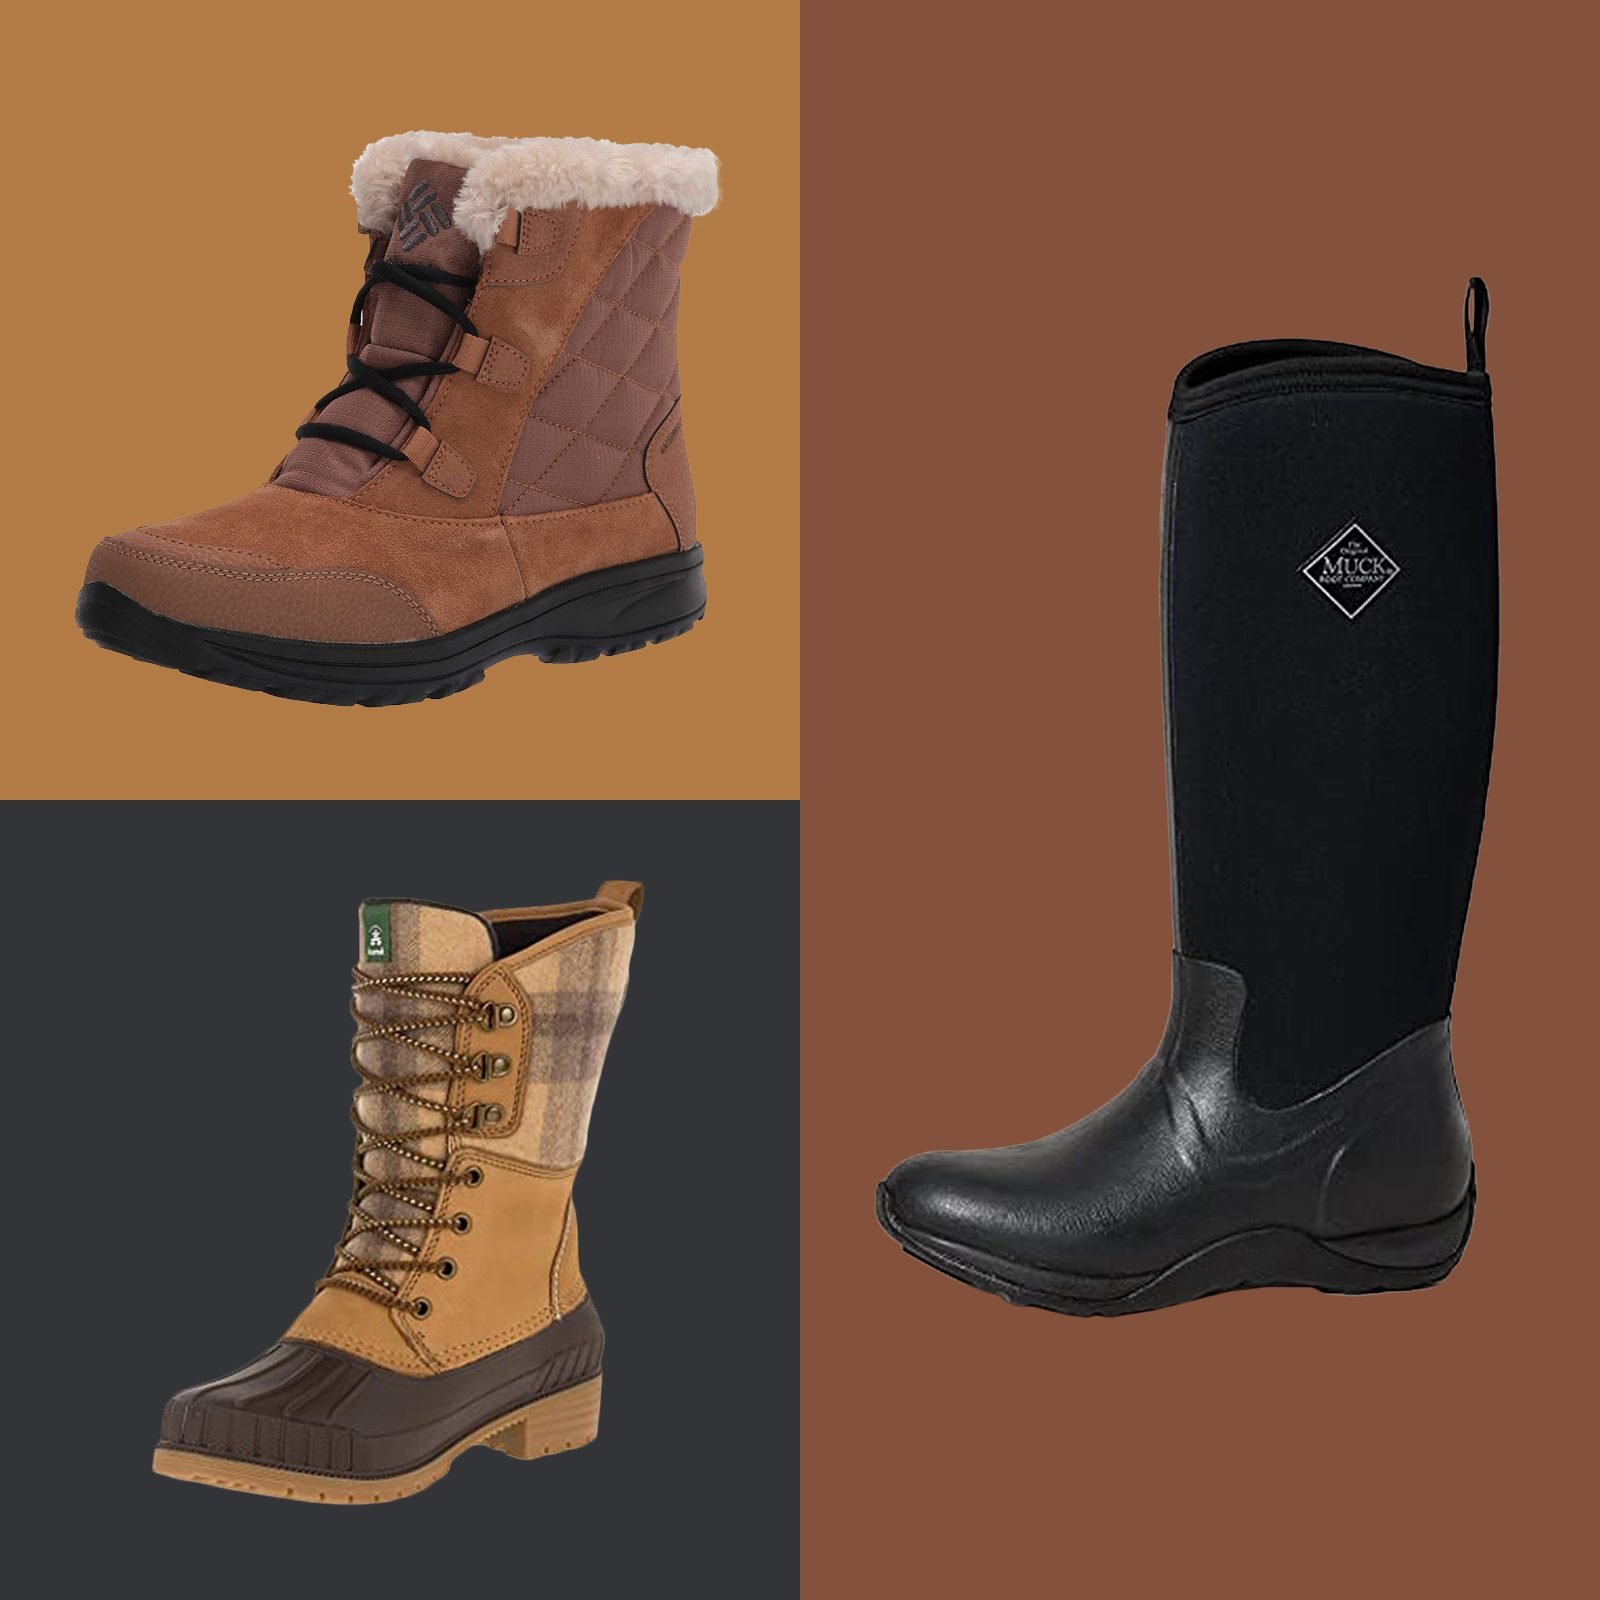 40 Best Stylish Winter Boots for Women: Sorel, Ugg & More (2022